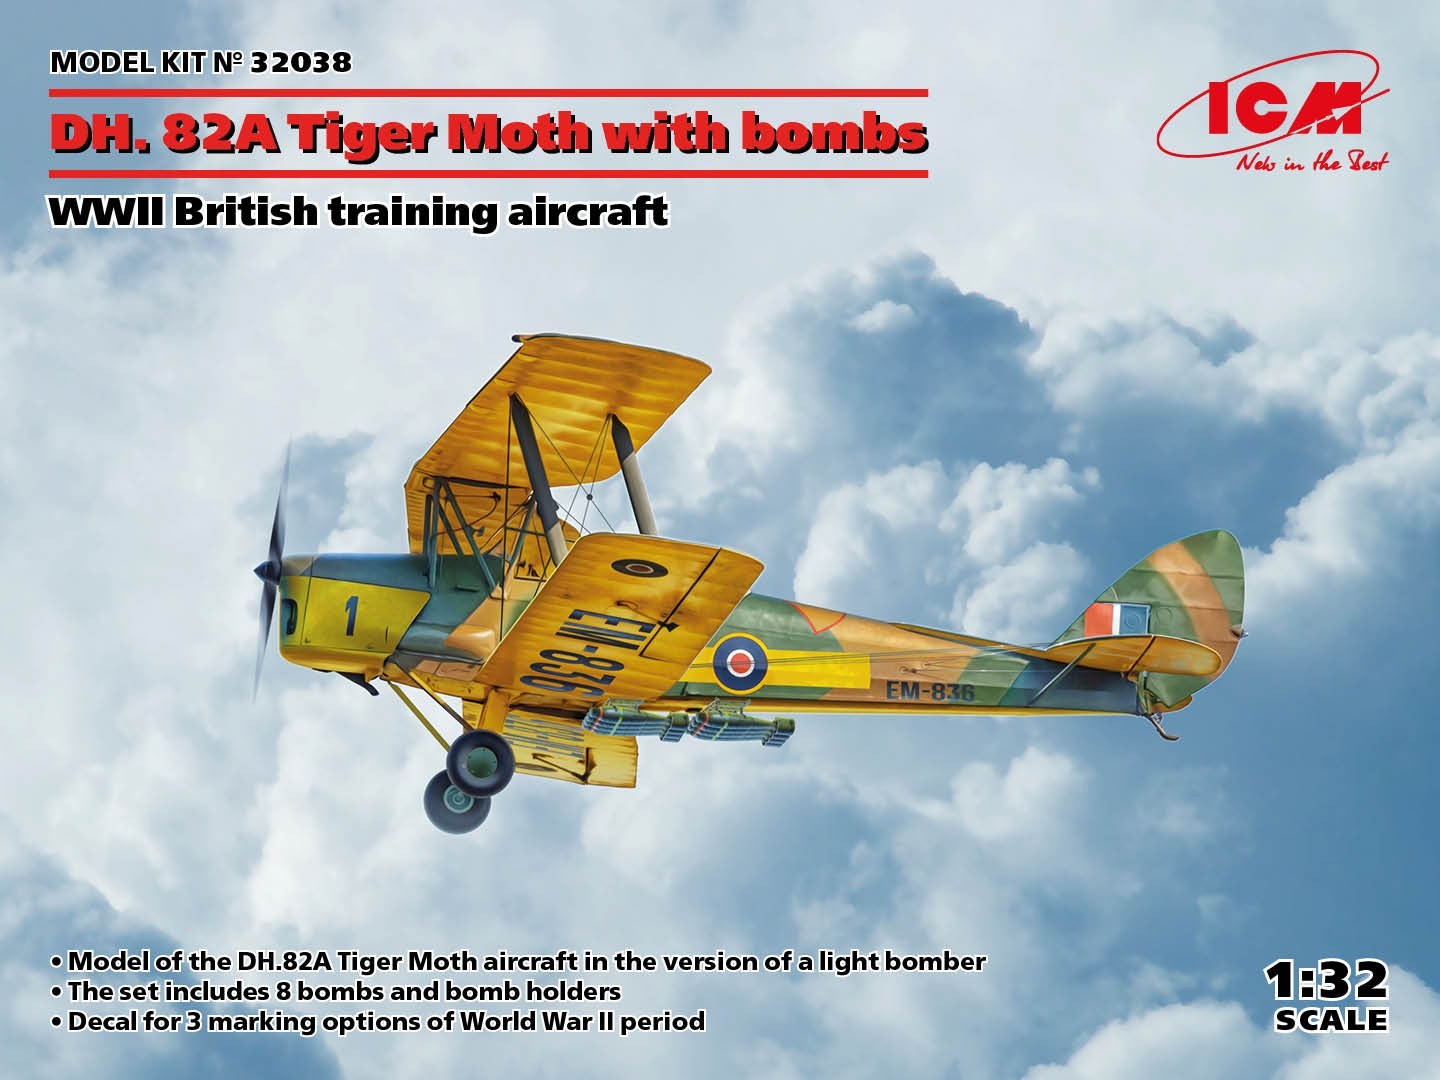 32038 - DH. 82A Tiger Moth With Bombs - 1:32